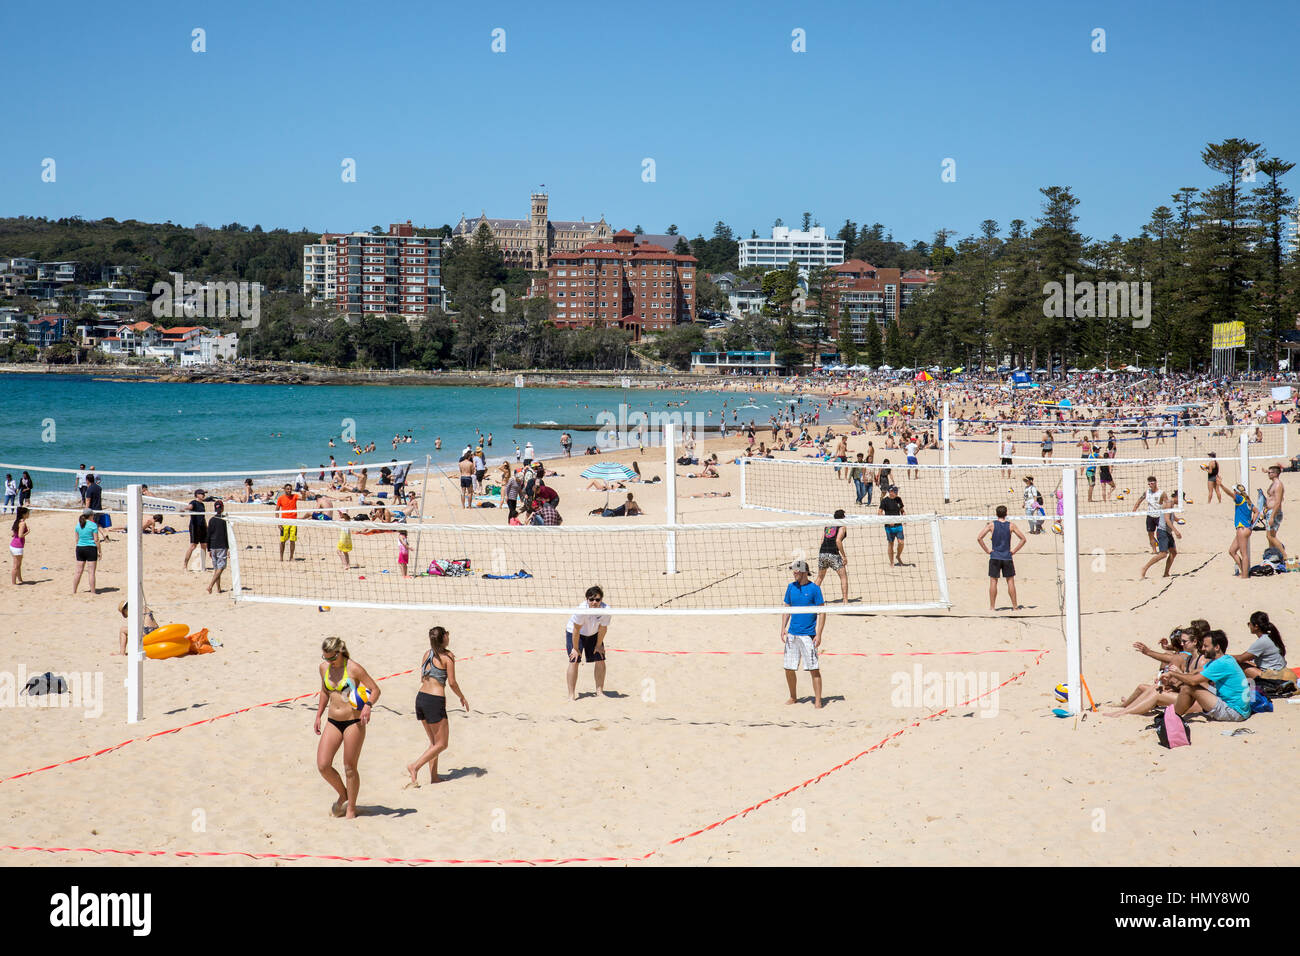 Playing beach volleyball on Manly Beach, one of Sydney's popular coastal beaches, New South Wales,Australia Stock Photo